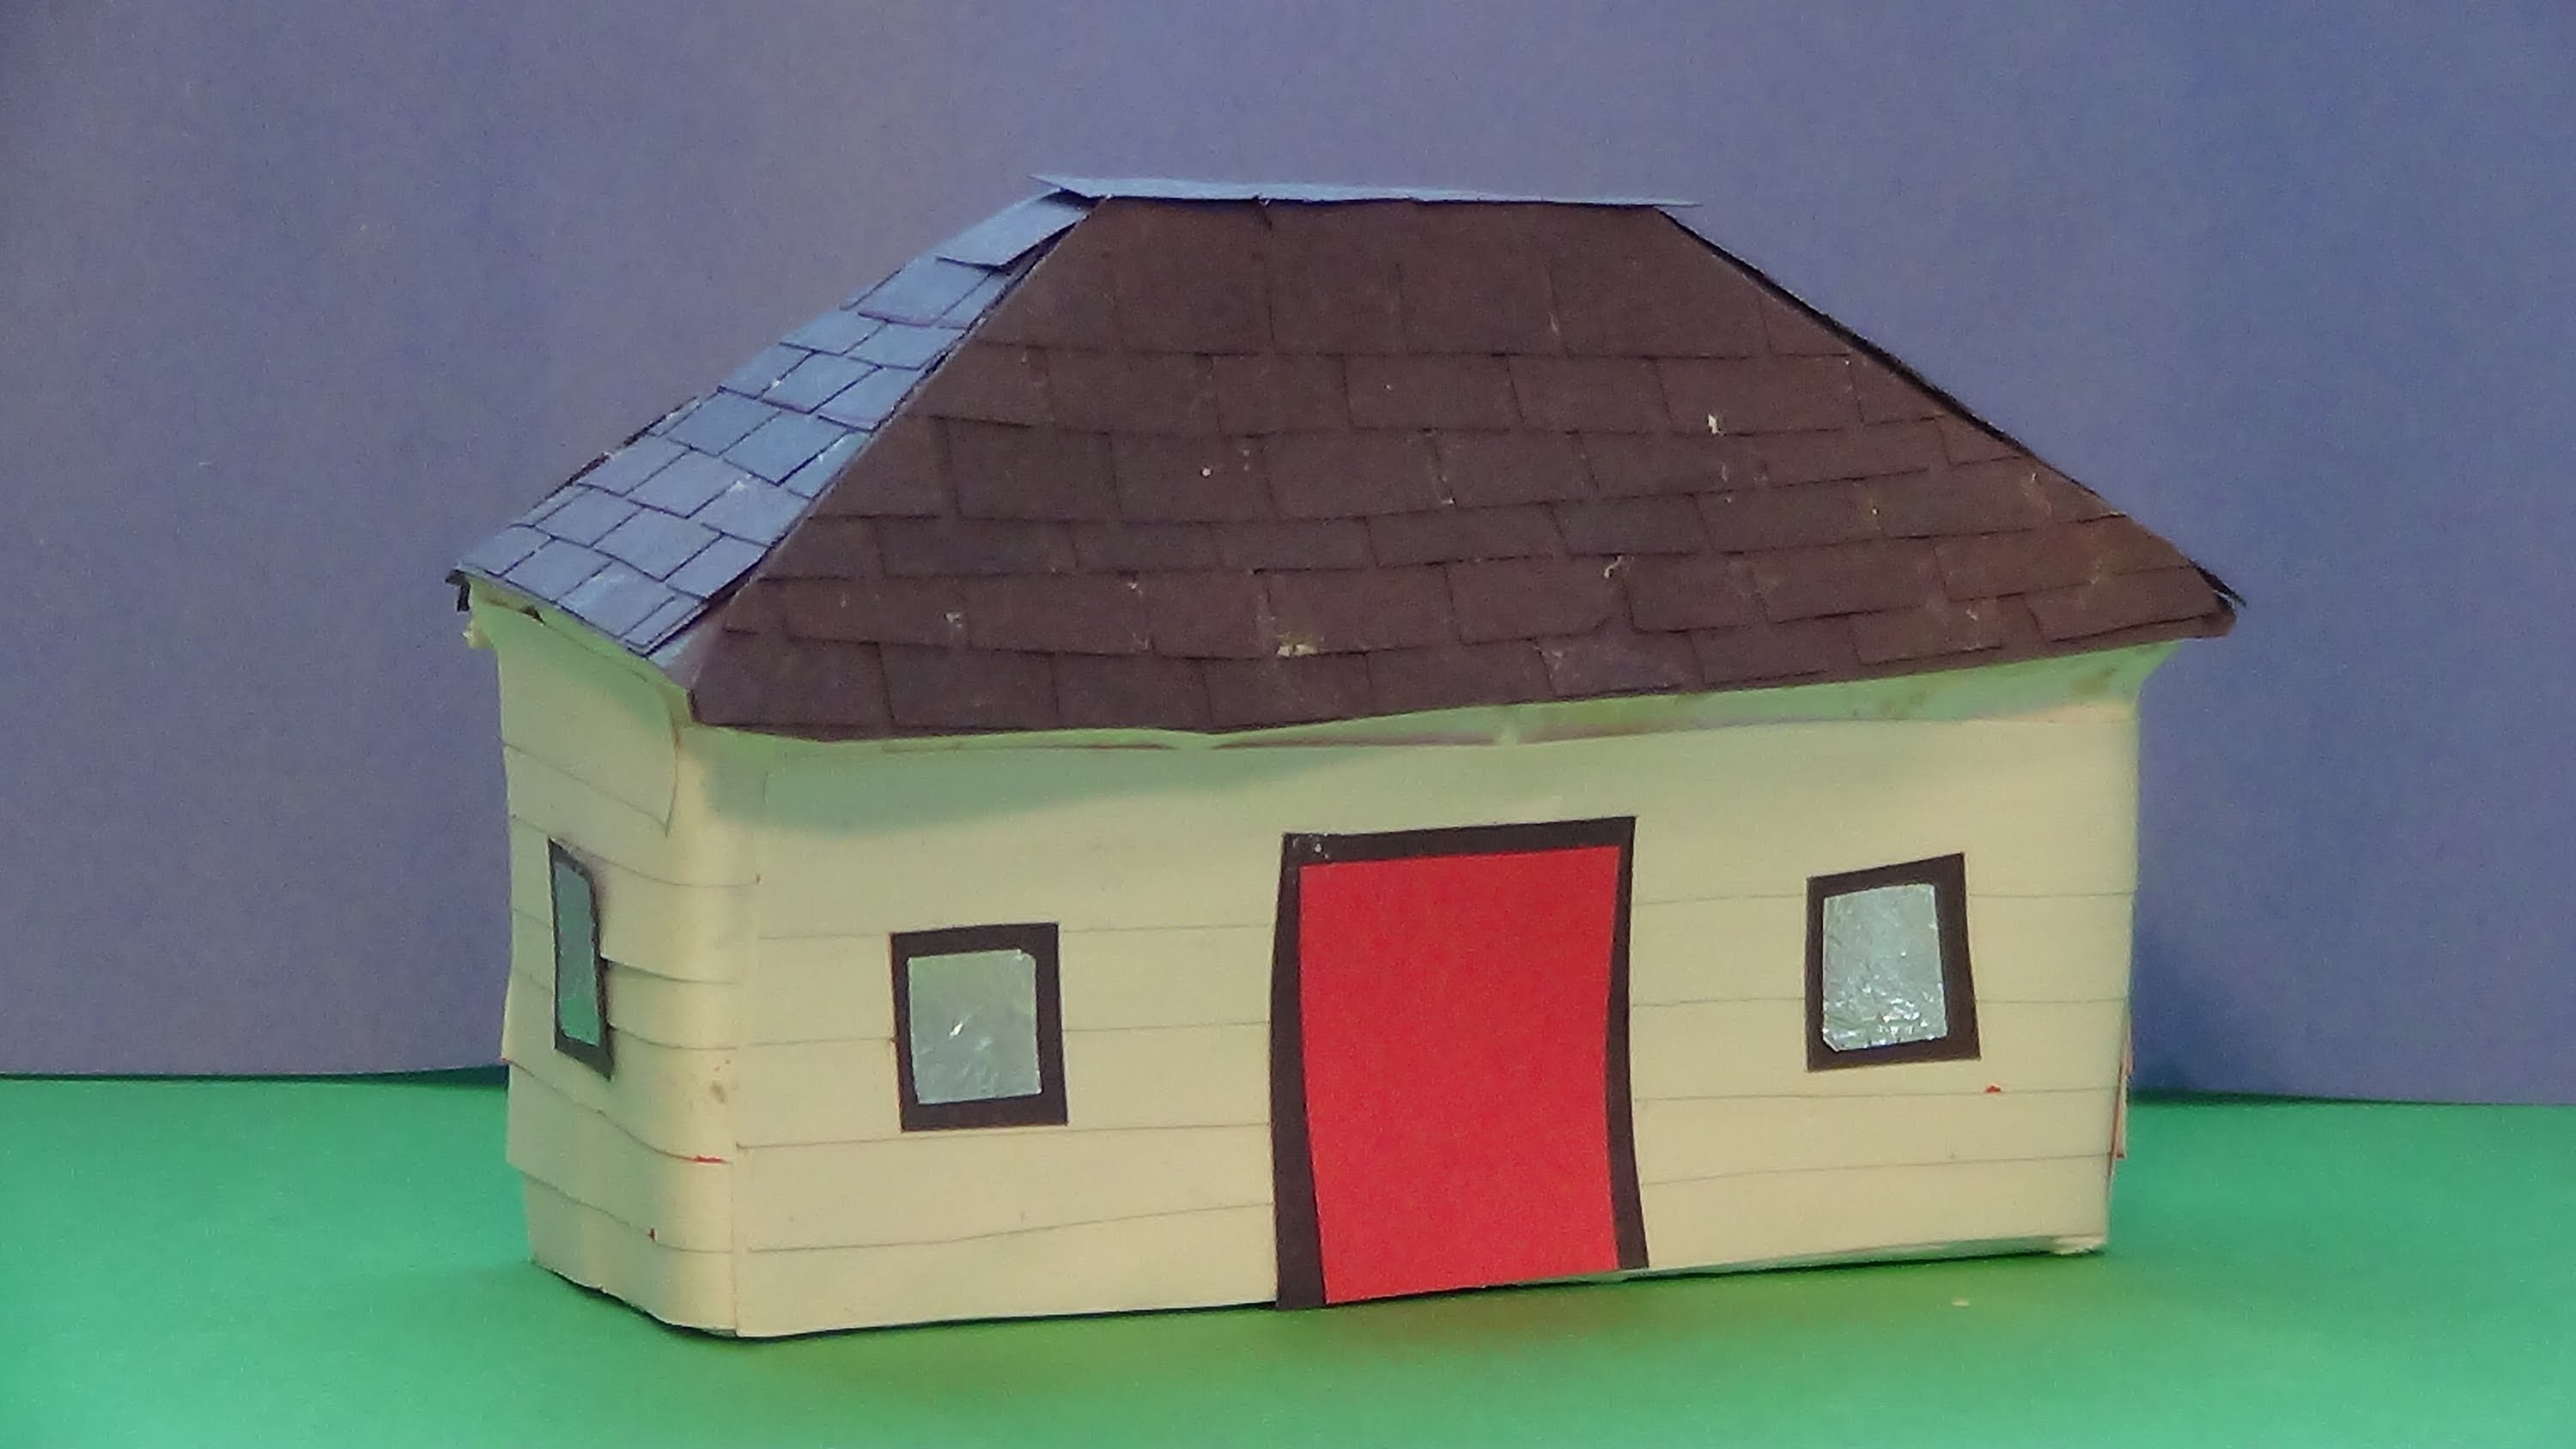 How to Make a Model of a House - YouTube